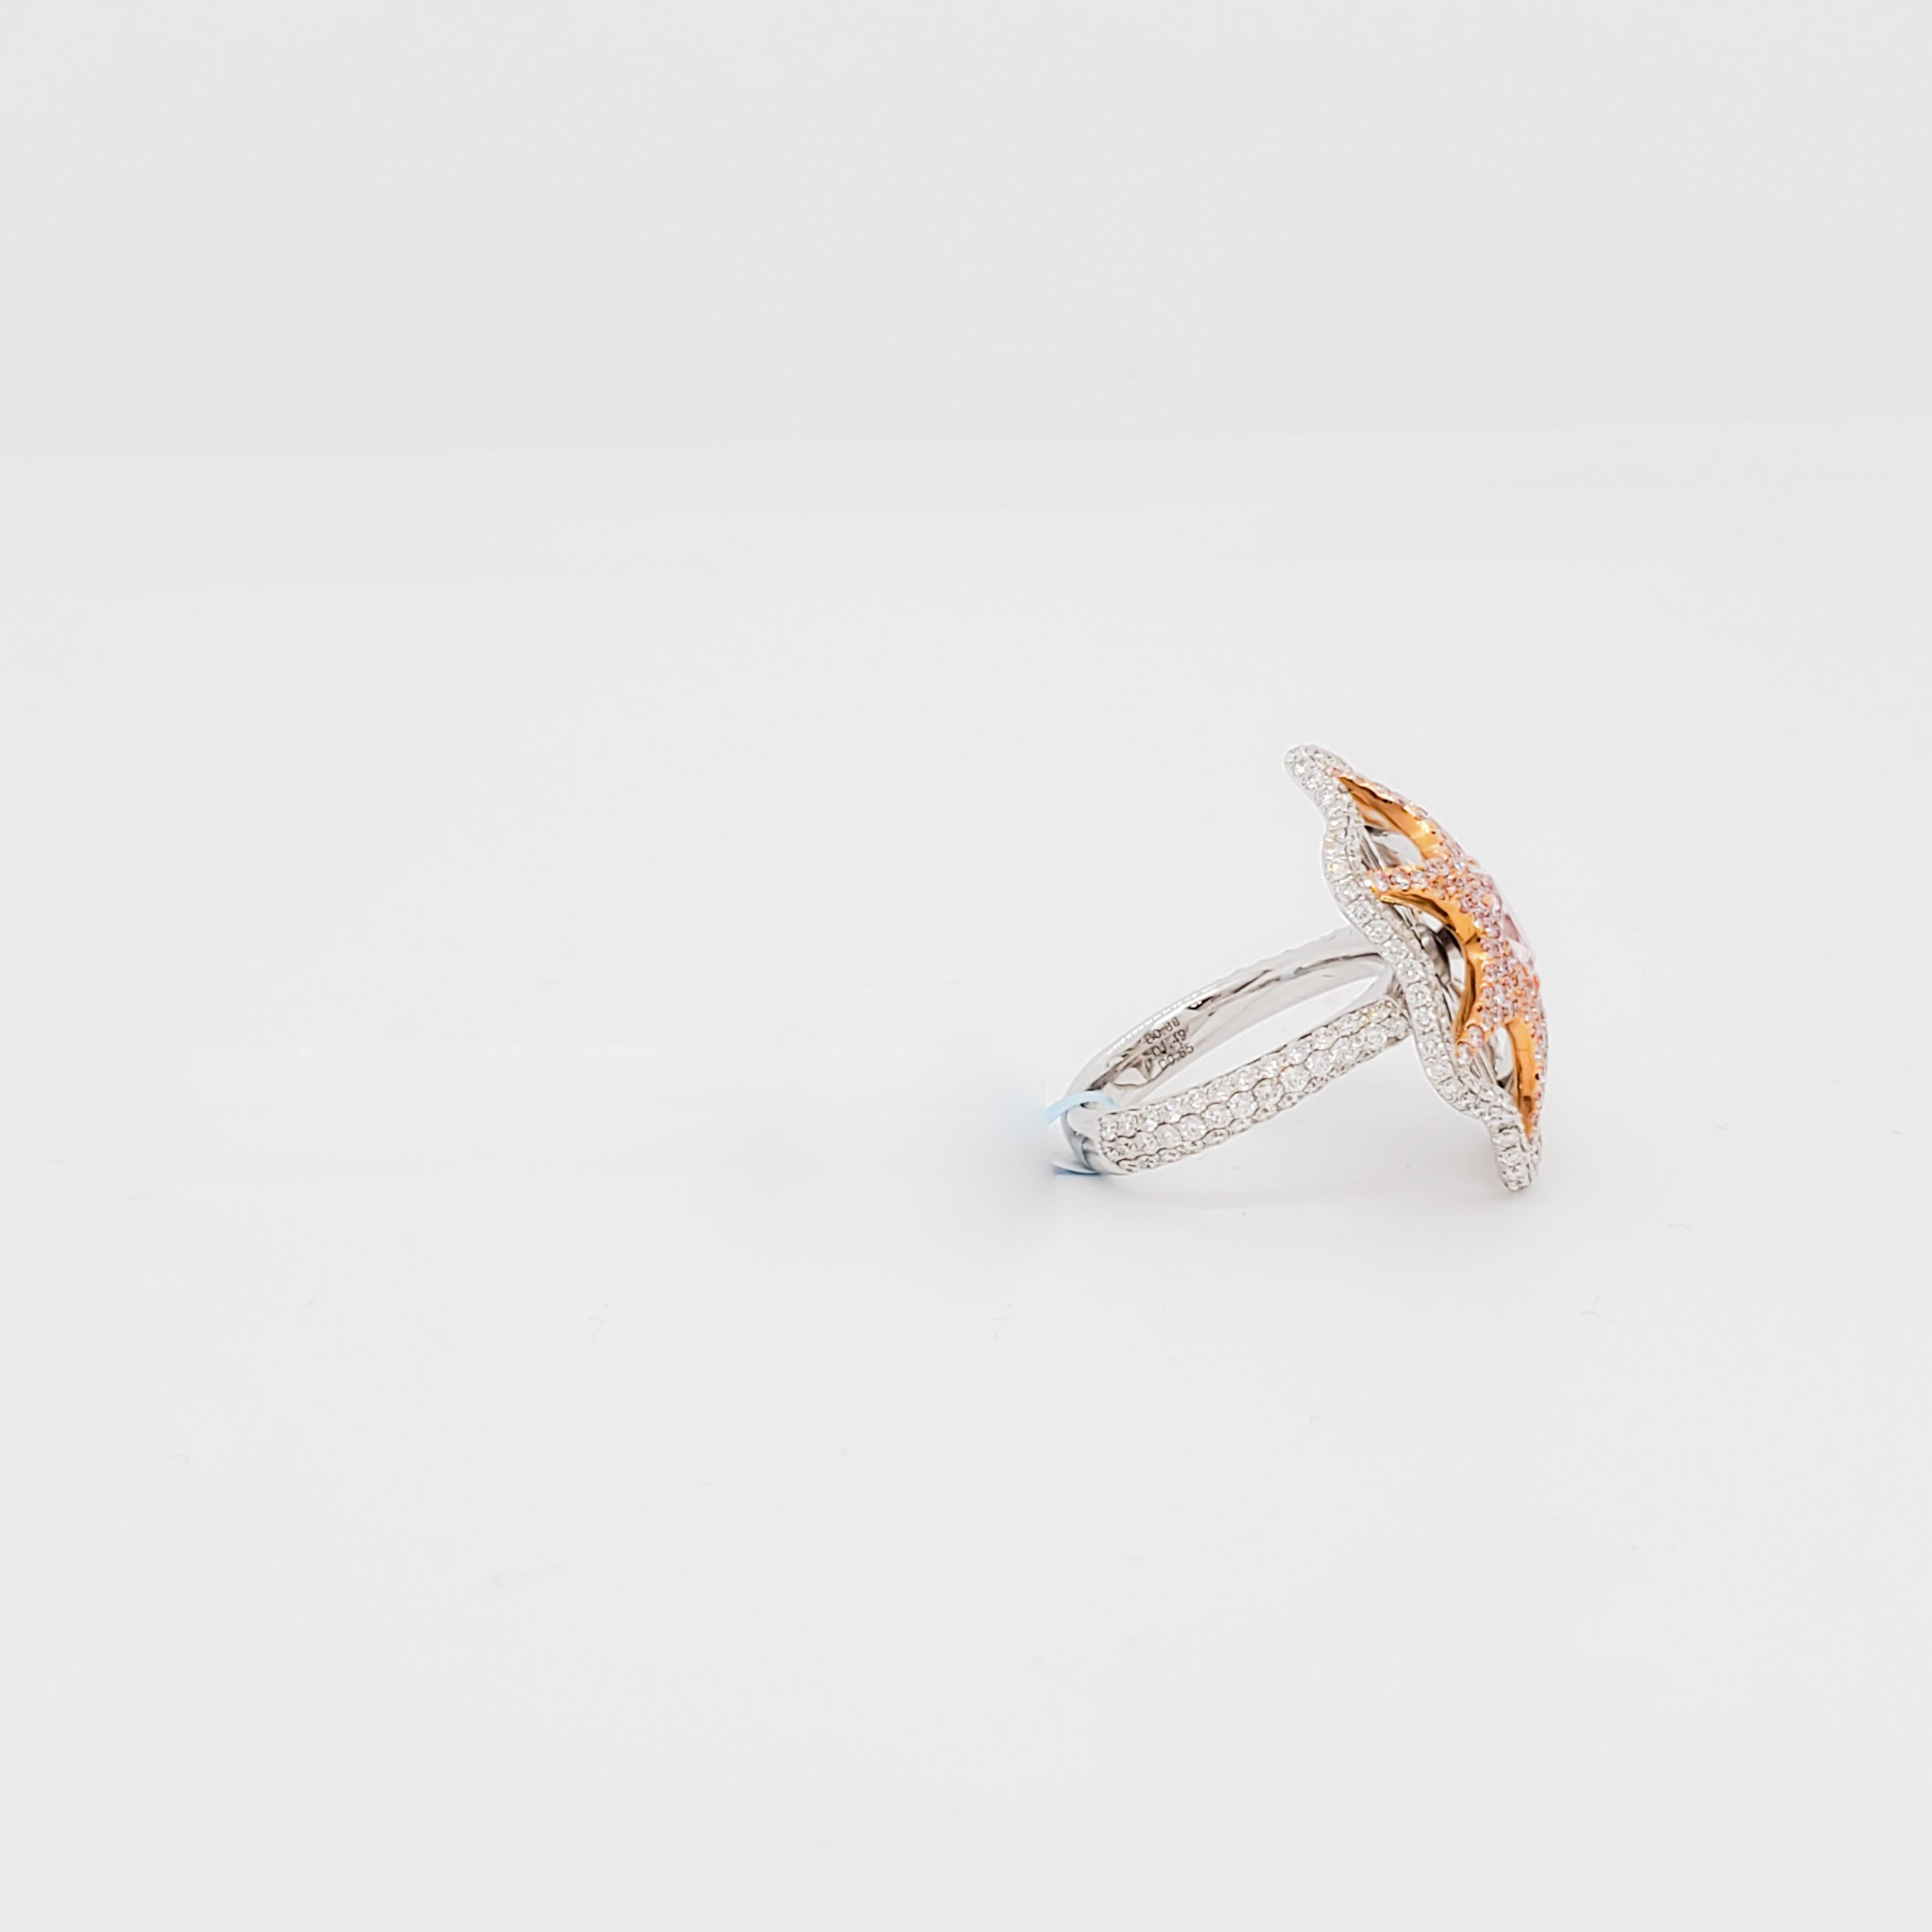 Natural Pink and White Diamond Starfish Design Cocktail Ring in 18k Gold For Sale 2